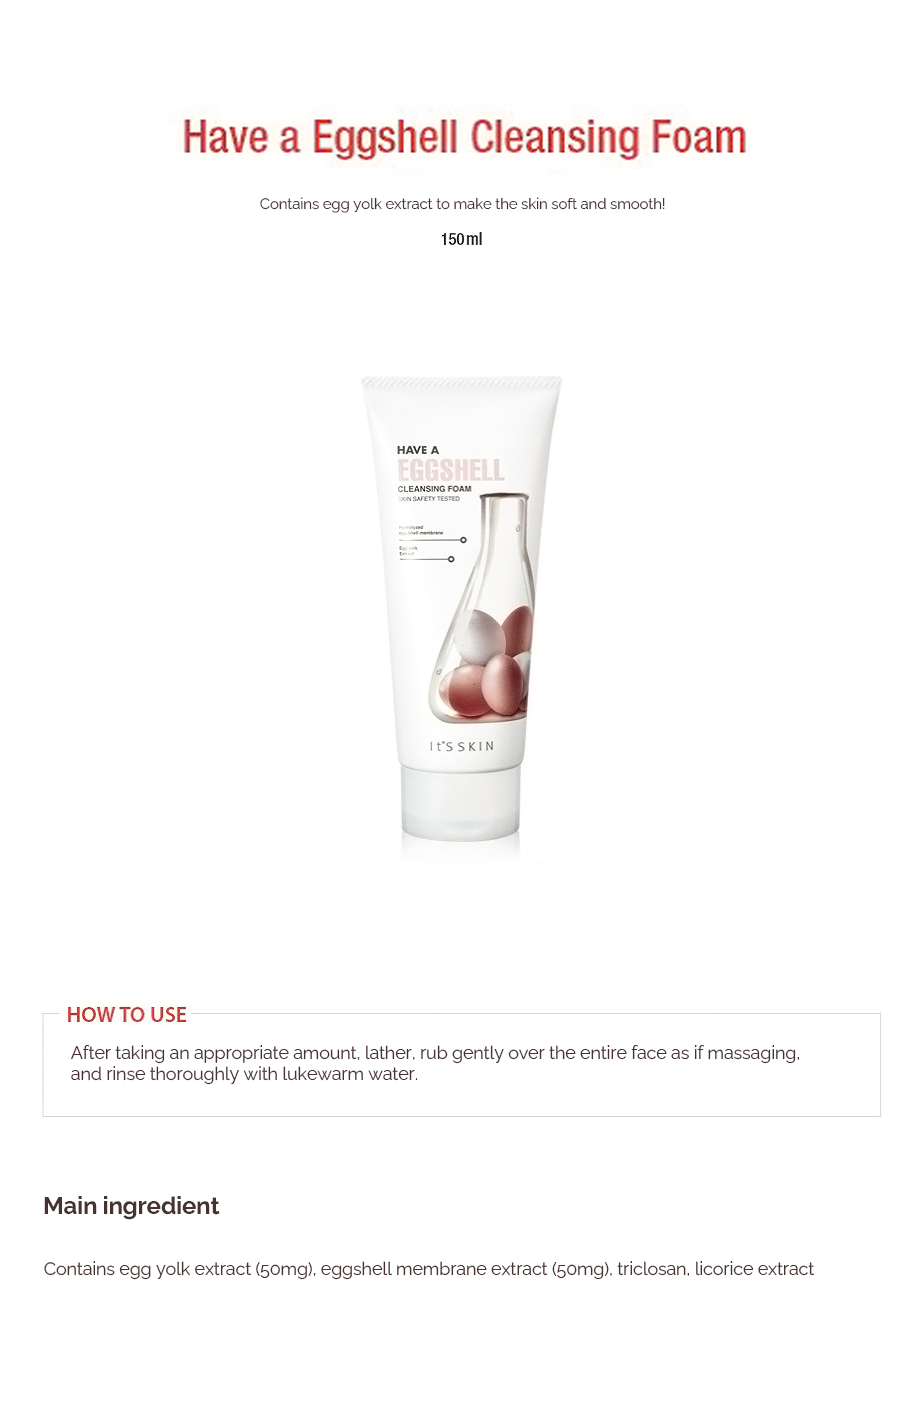 [it's SKIN] Have a Eggshell Cleansing Foam